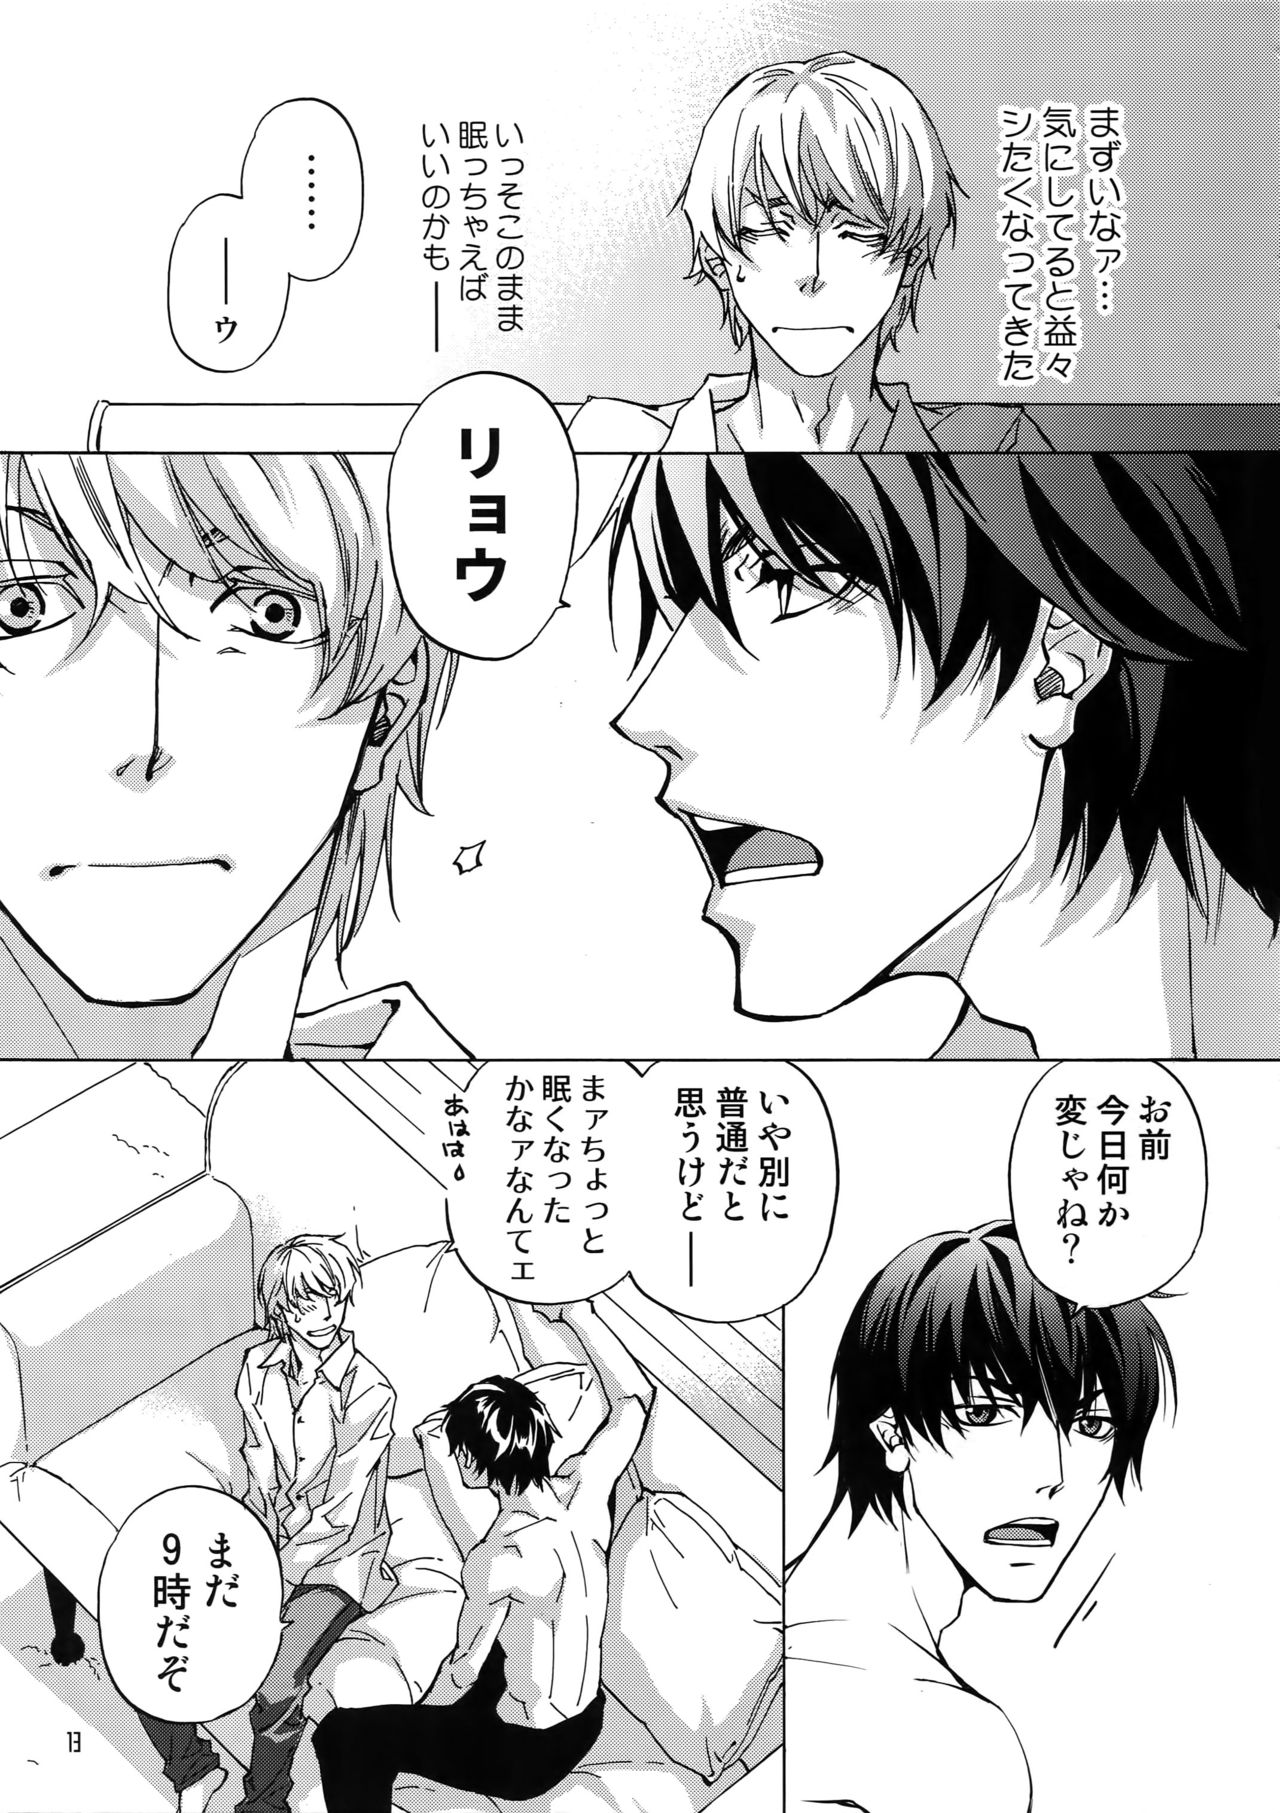 [East End Club (Matoh Sanami)] BACK STAGE PASS 10 page 10 full